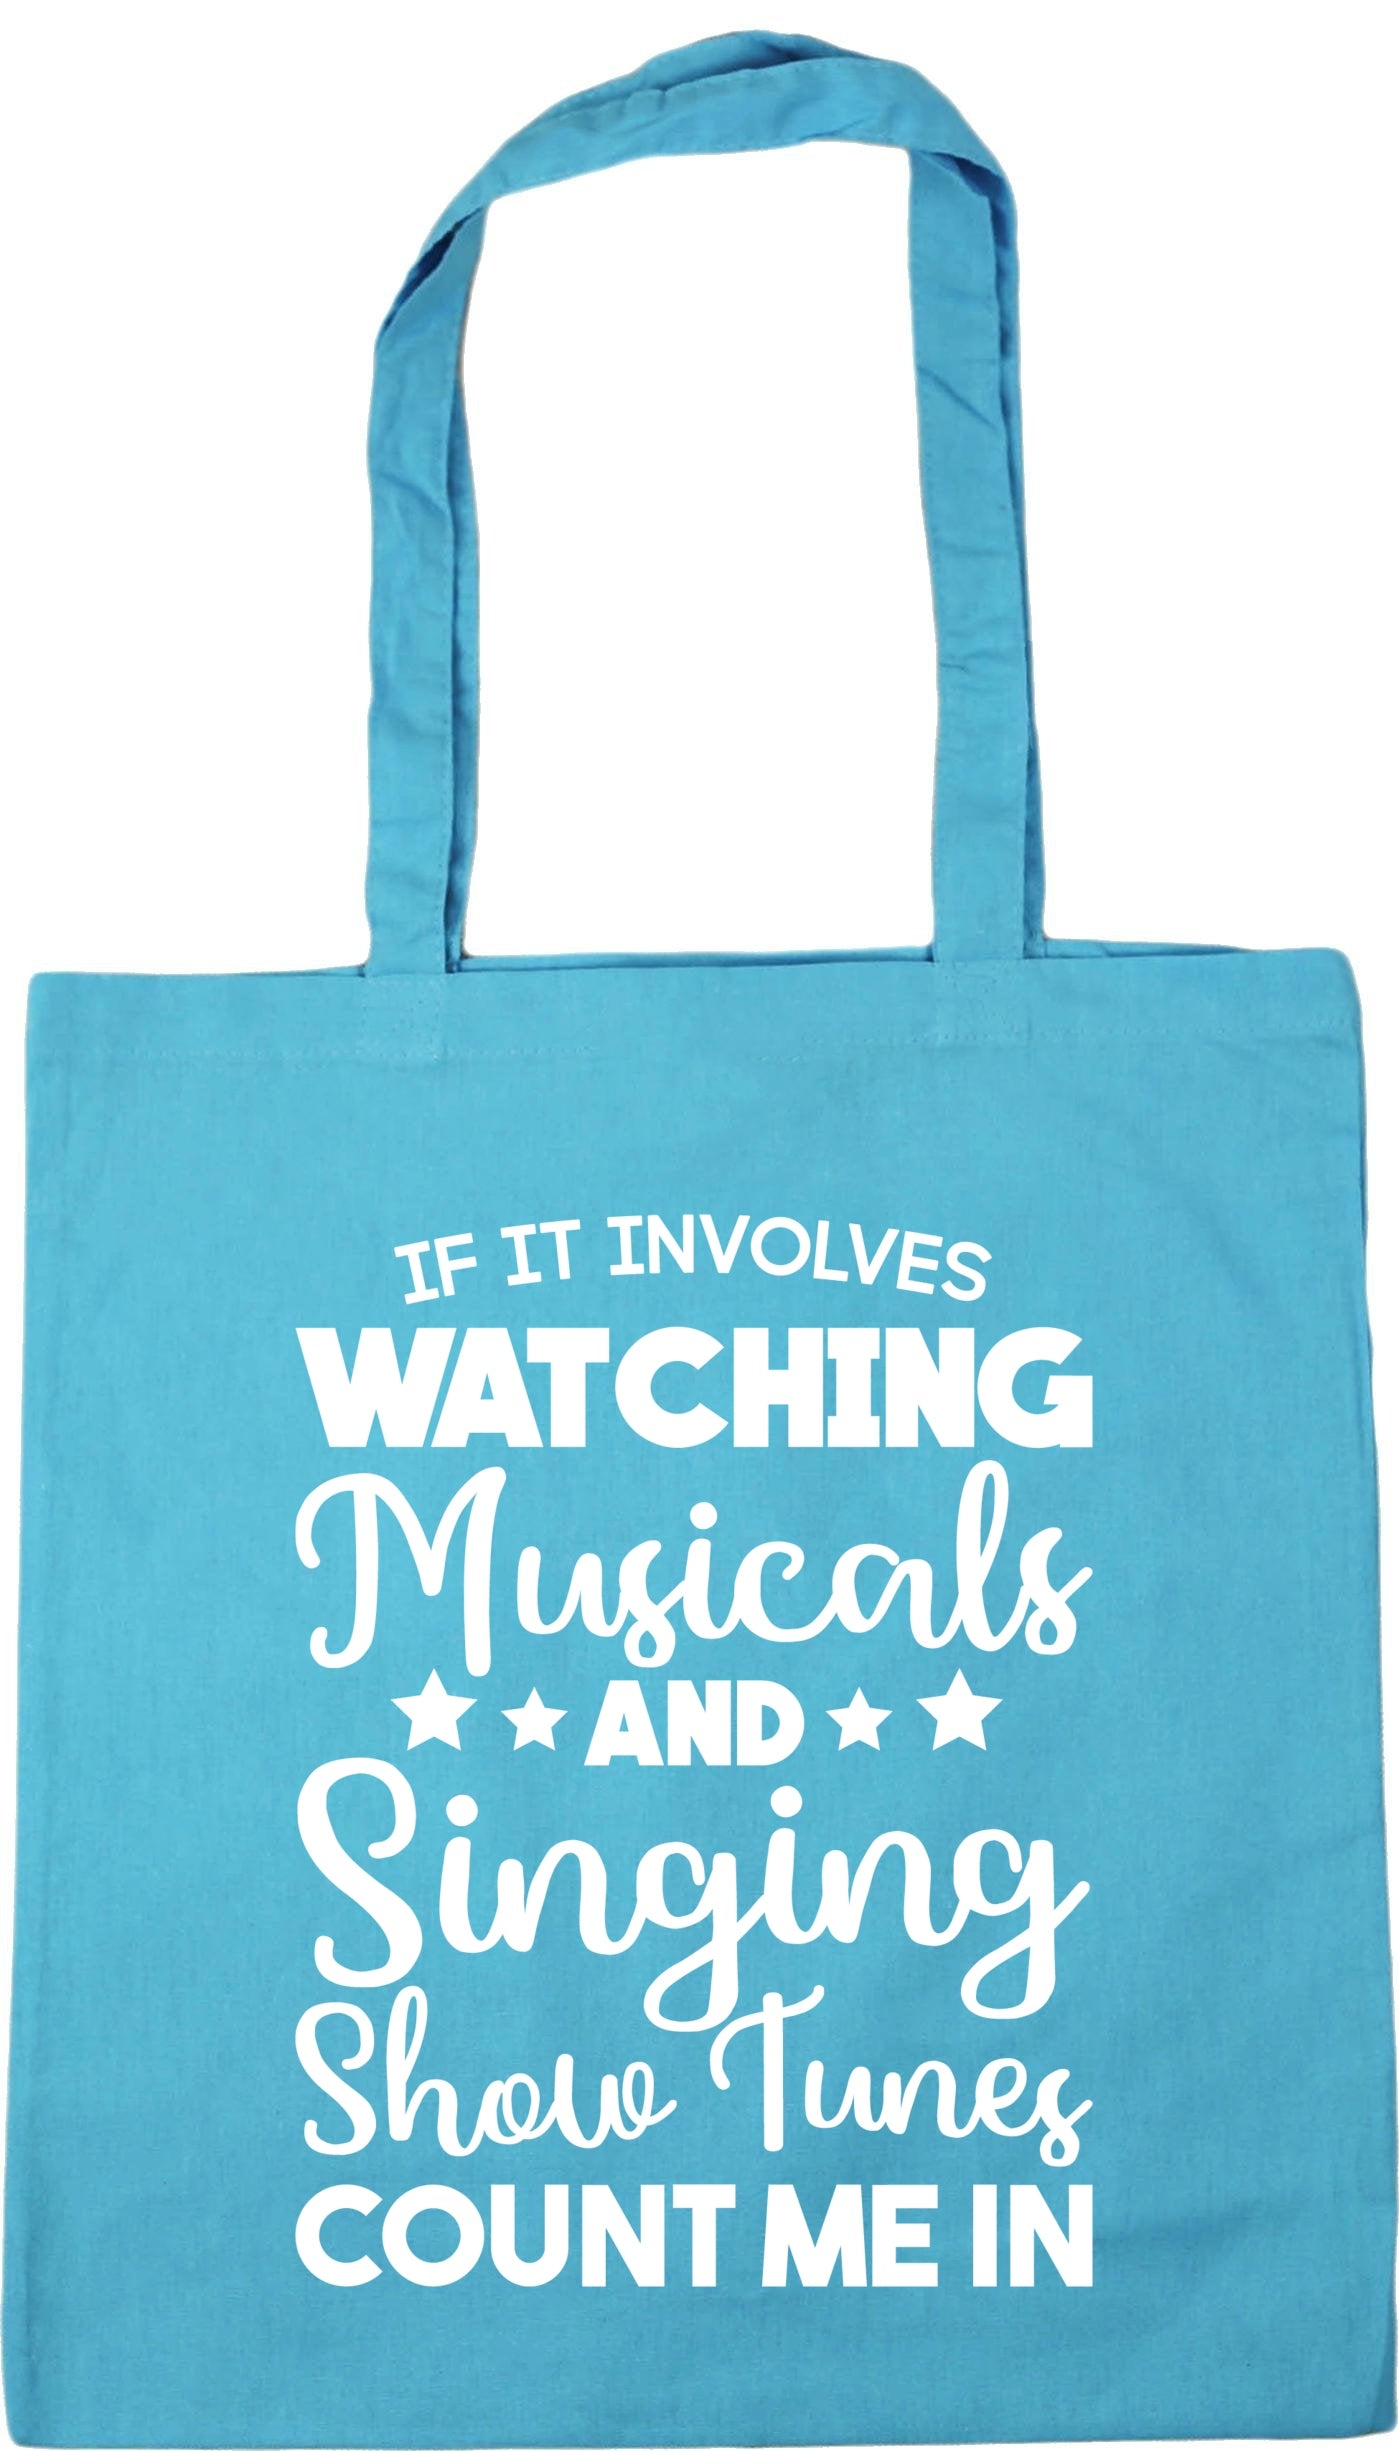 If It Involves Watching Musicals & Singing Show Tunes Count Me In Tote Bag